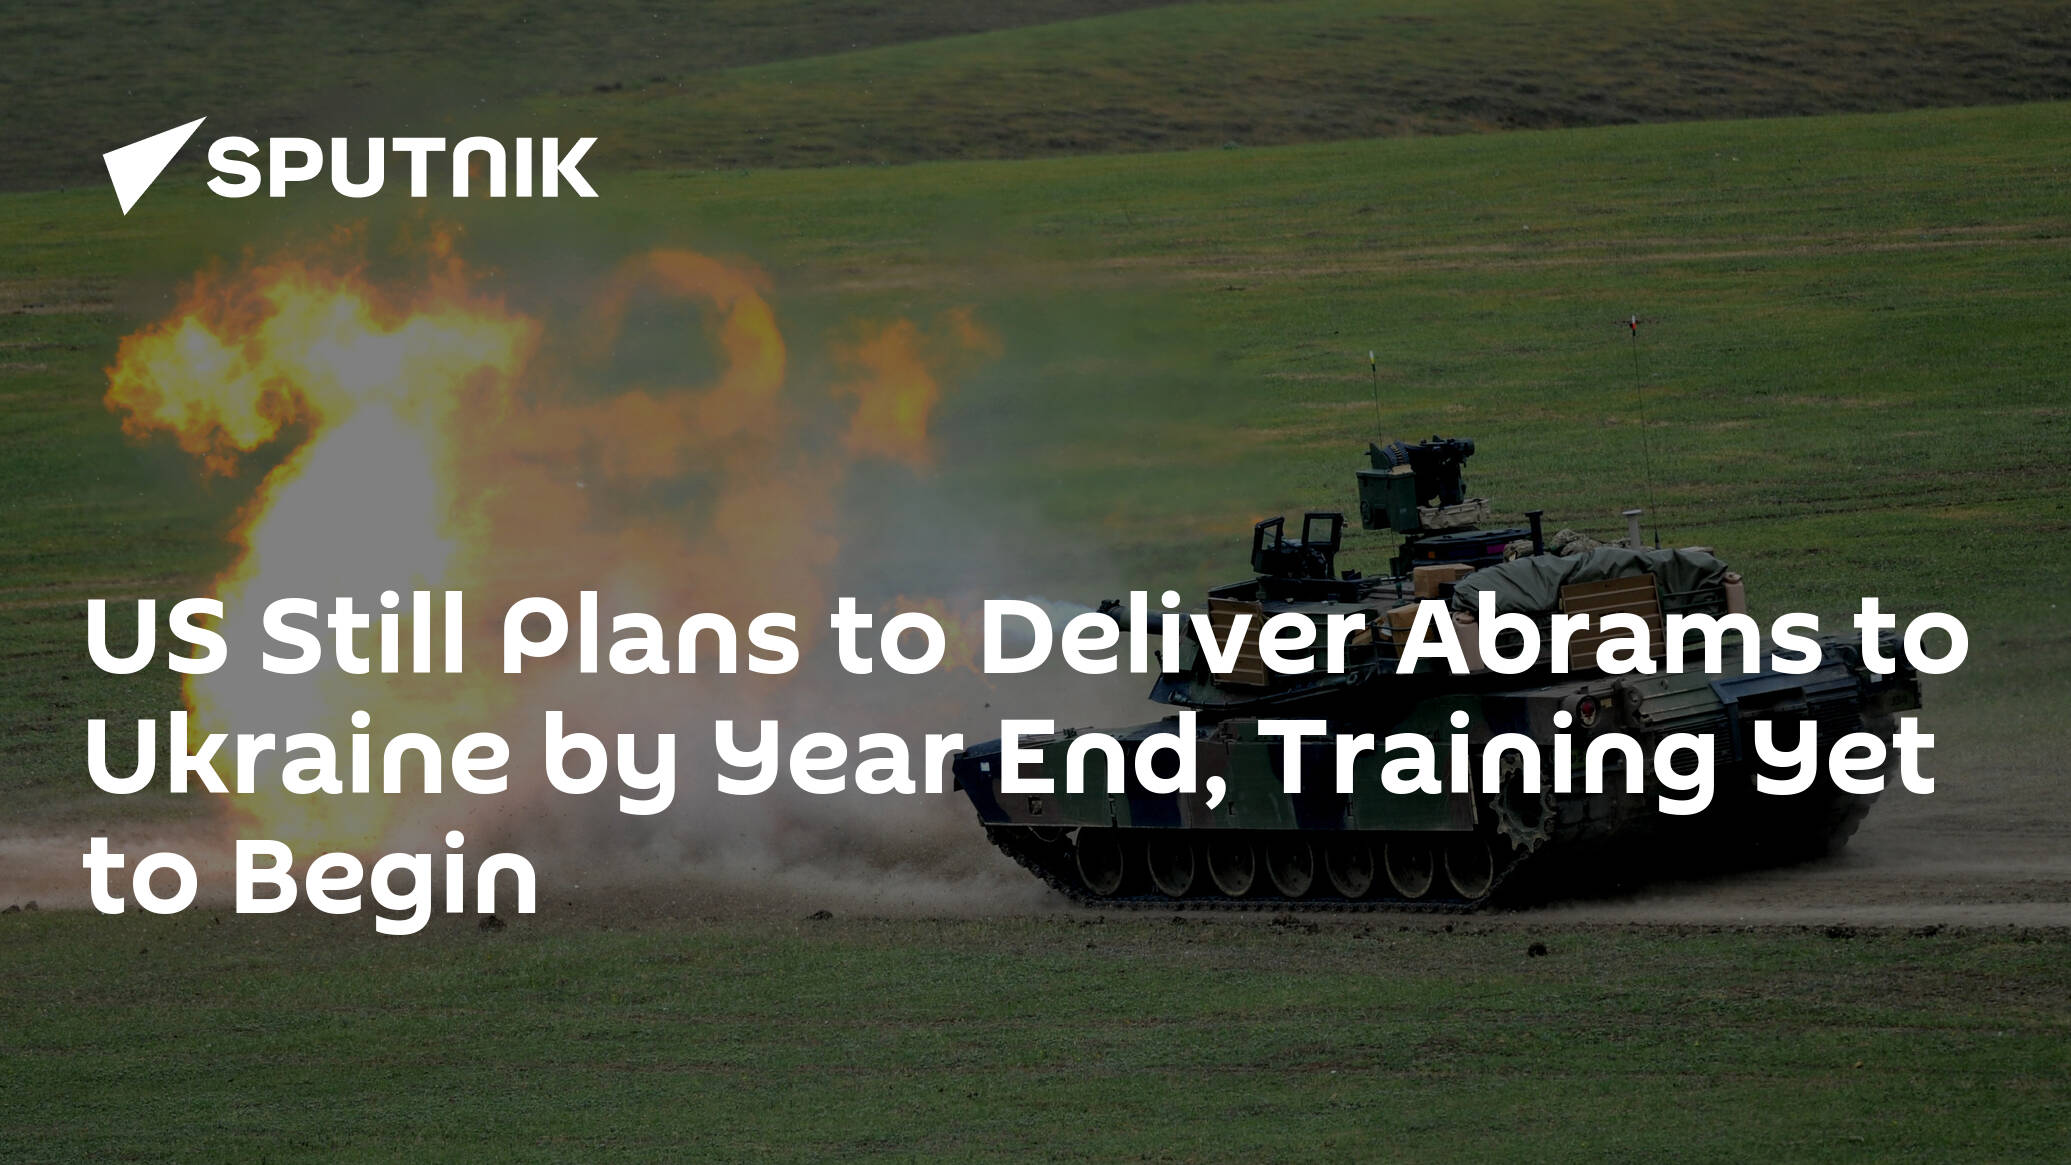 US Still Plans to Deliver Abrams to Ukraine by Year End, Training Yet to Begin